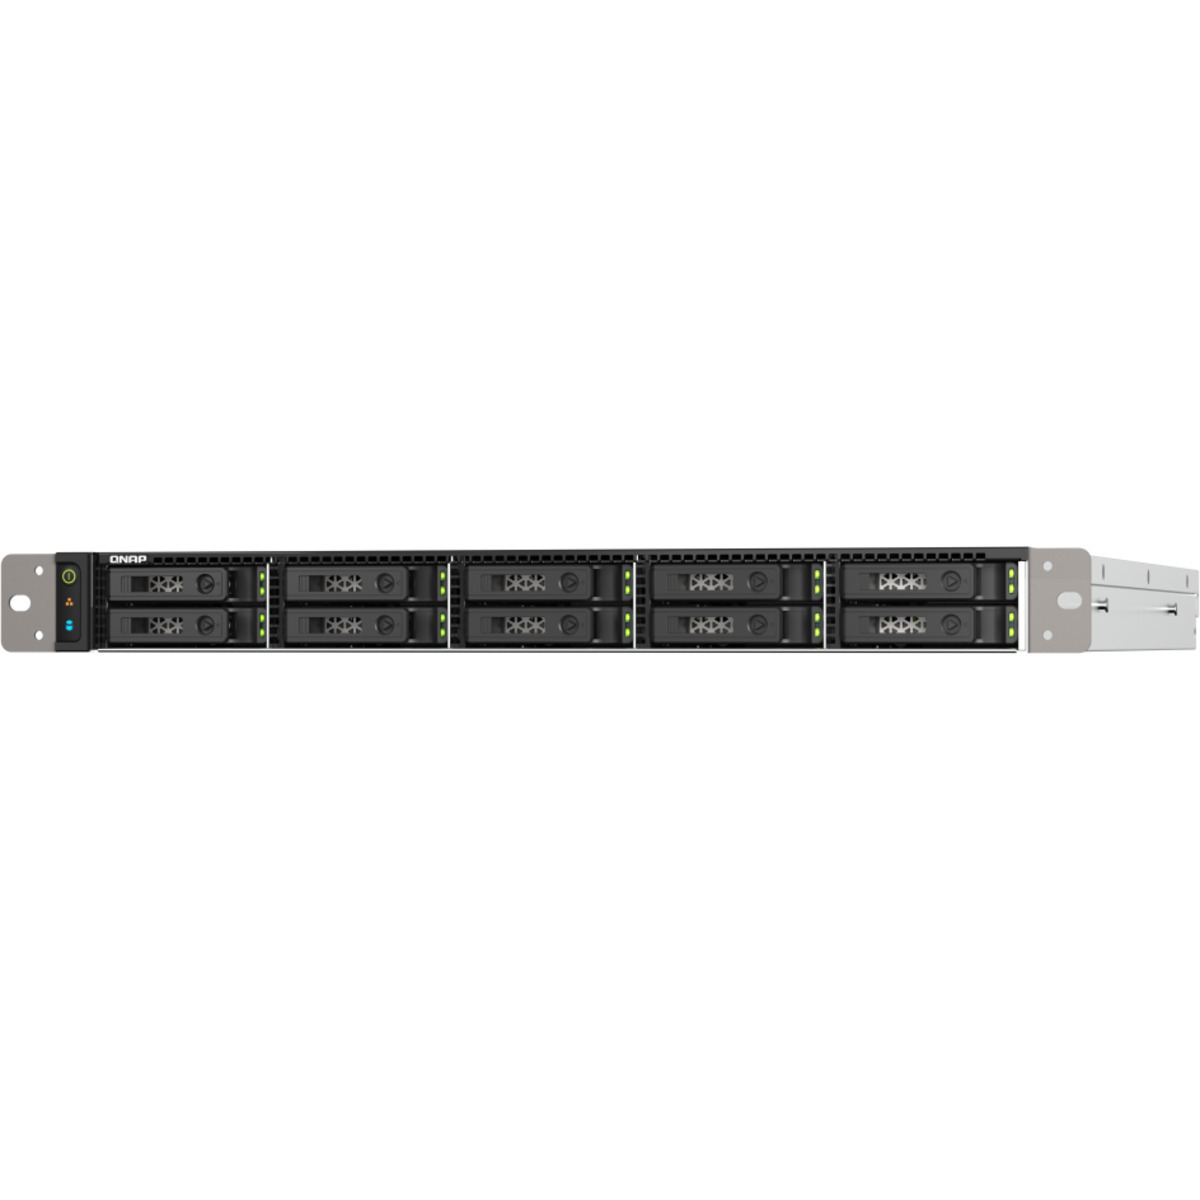 QNAP TS-h1090FU-7302P 12tb 10-Bay RackMount Large Business / Enterprise NAS - Network Attached Storage Device 6x2tb Sabrent Rocket 5 SB-RKT5-2TB  14000/12000MB/s M.2 2280 NVMe SSD CONSUMER Class Drives Installed - Burn-In Tested TS-h1090FU-7302P